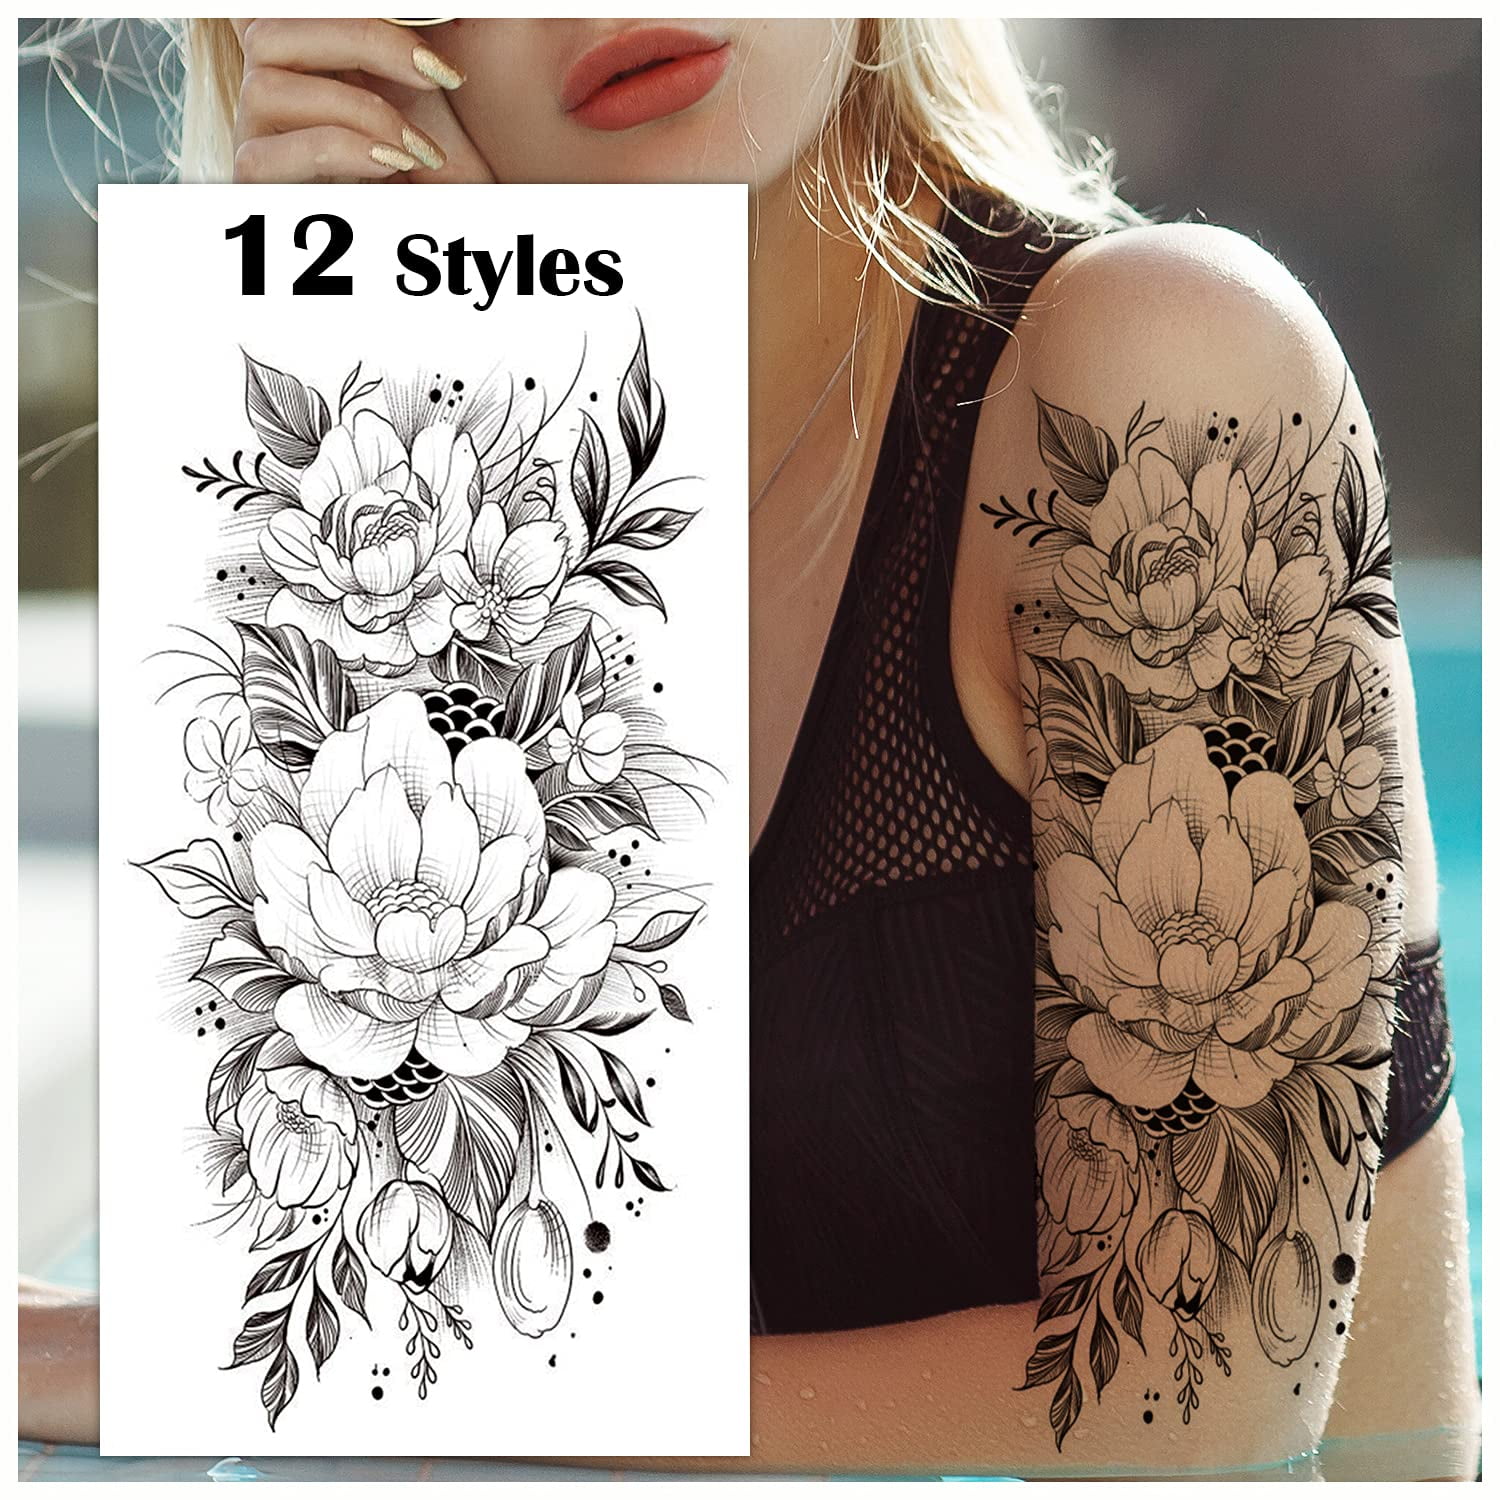 35 Half Butterfly Half Flower Tattoo Design Ideas You Need To Save